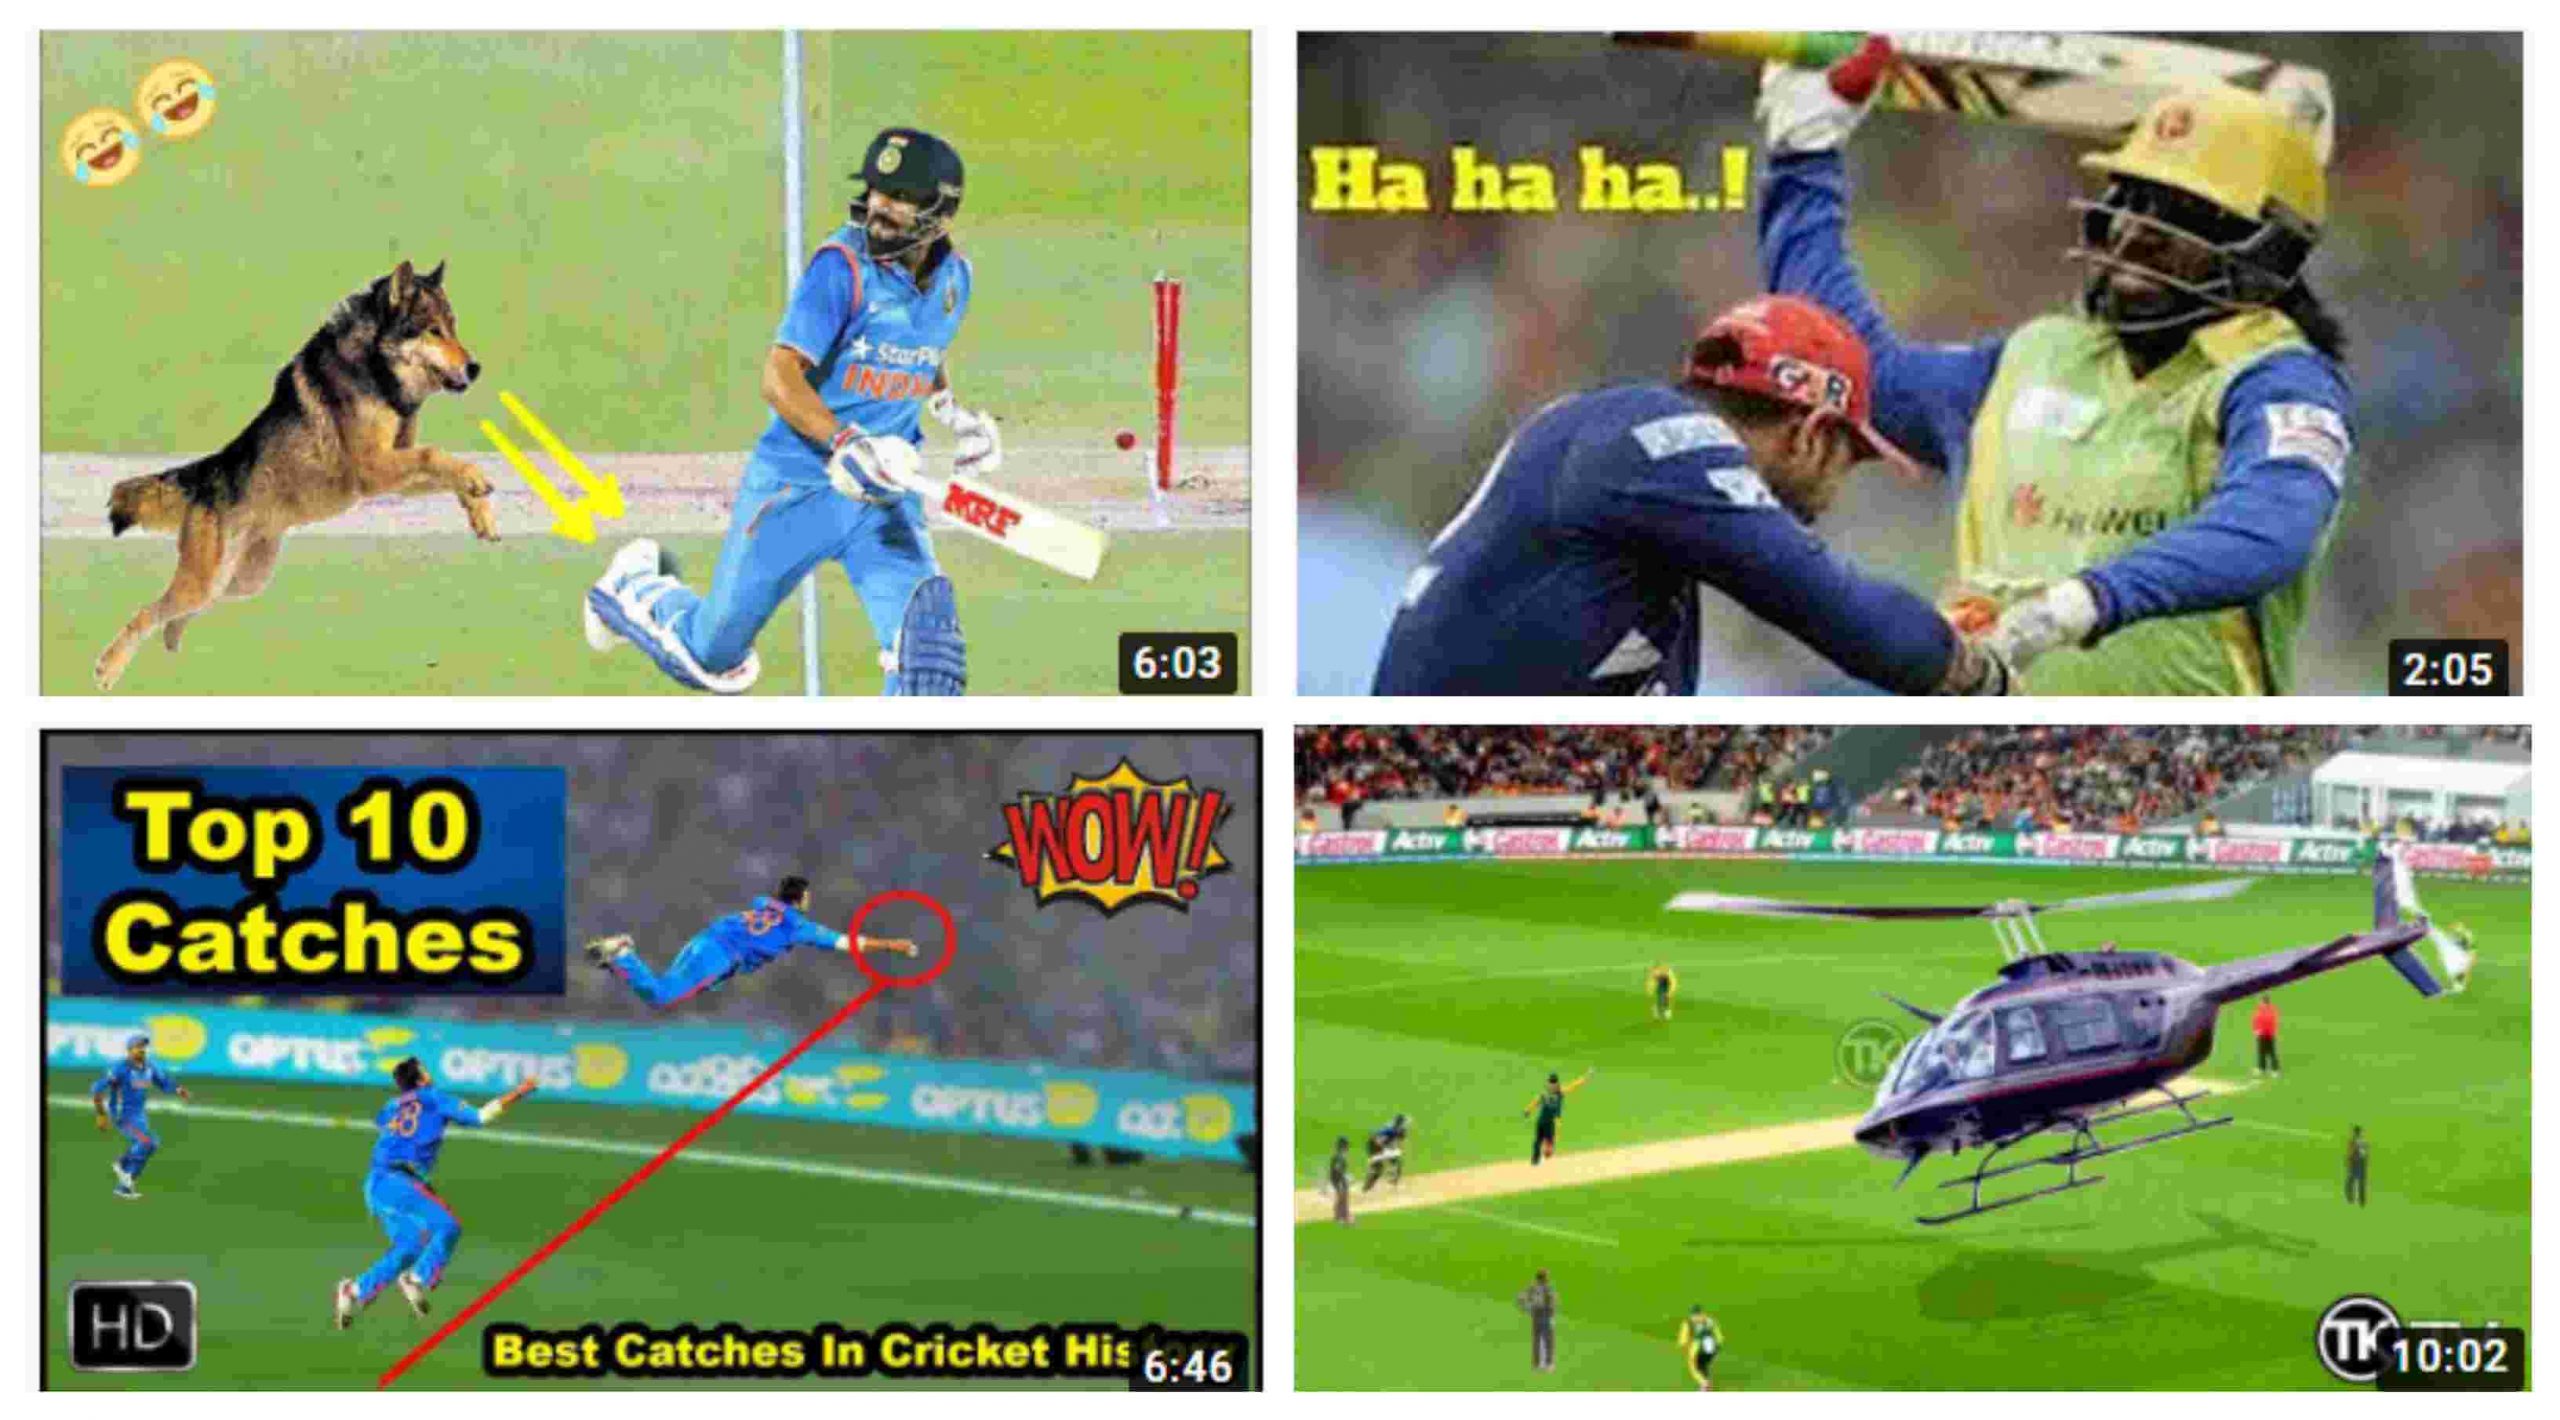 The Crazy World of Cricket Thumbnails on YouTube - A Little Voice